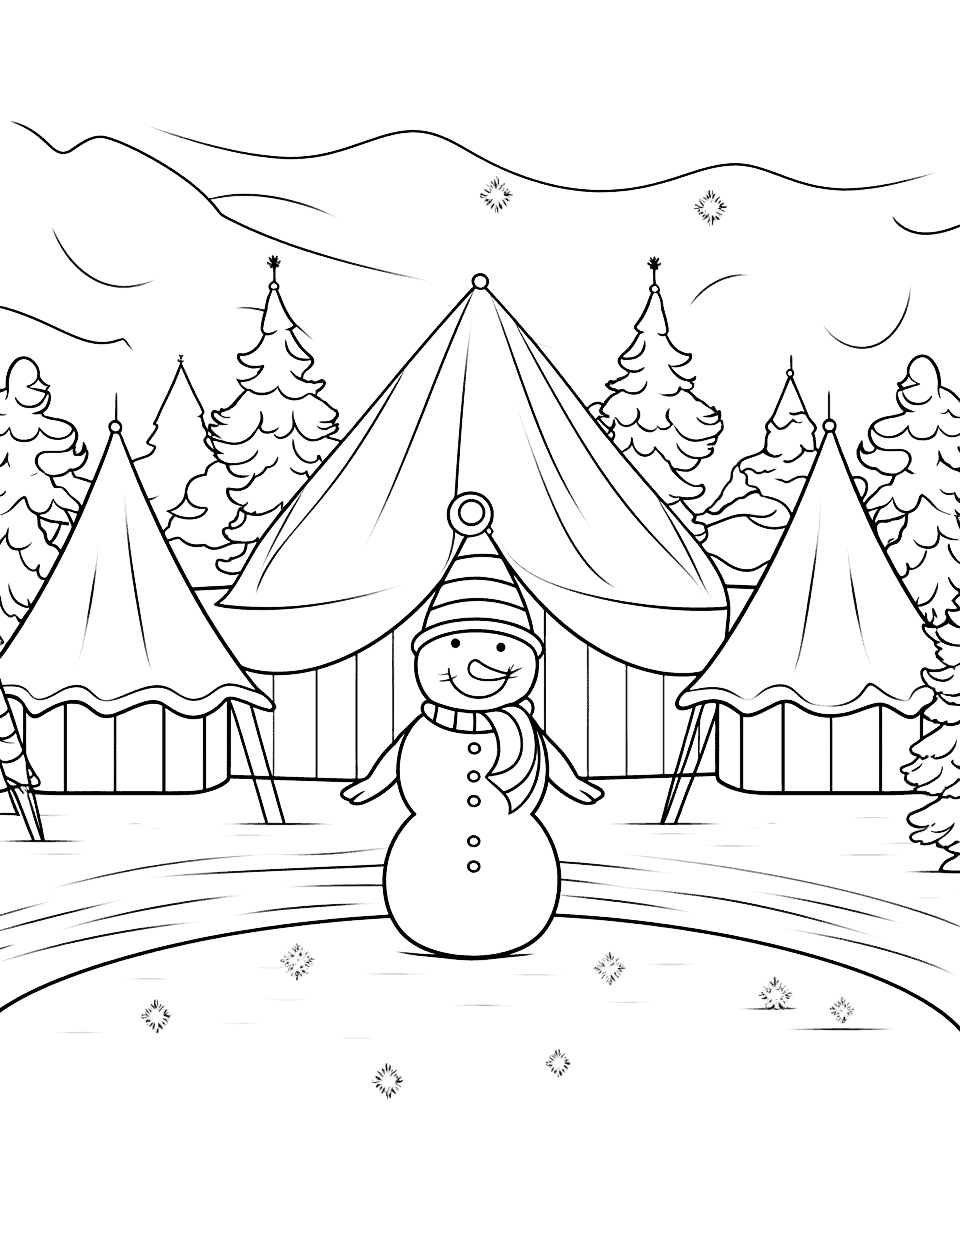 Winter Themed Circus Coloring Page - A circus scene set against a snowy backdrop.